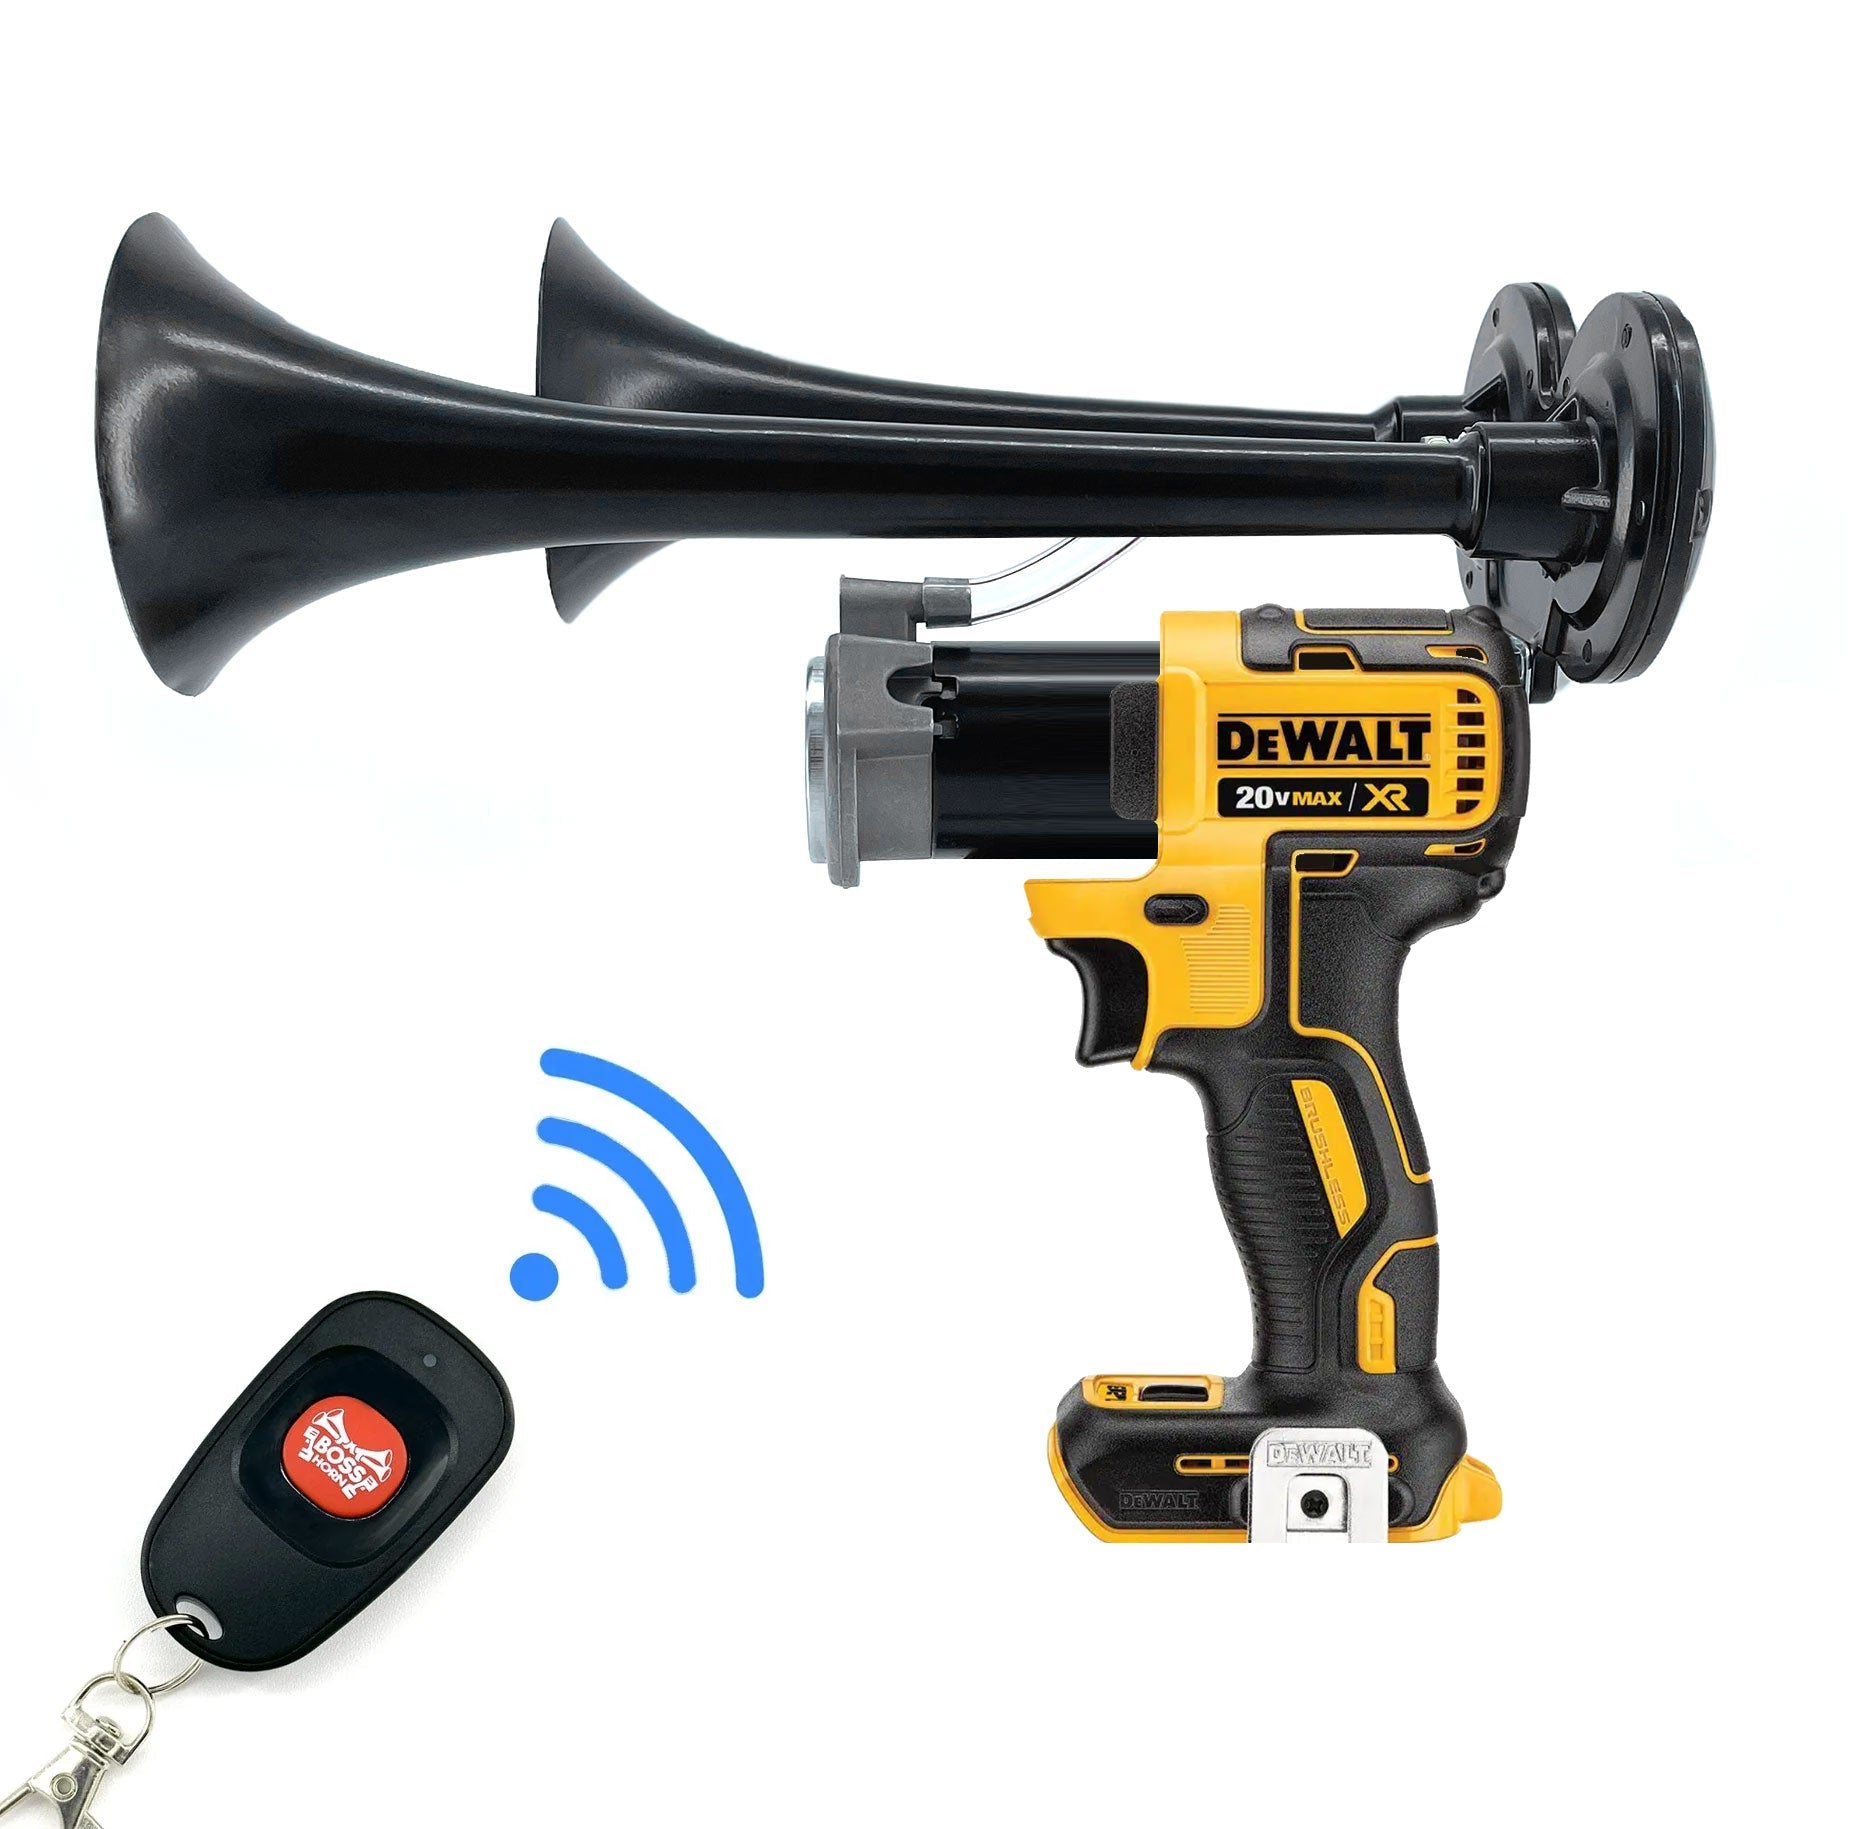 Buy Powerful Dewalt Train Horn and Make Impact Today!